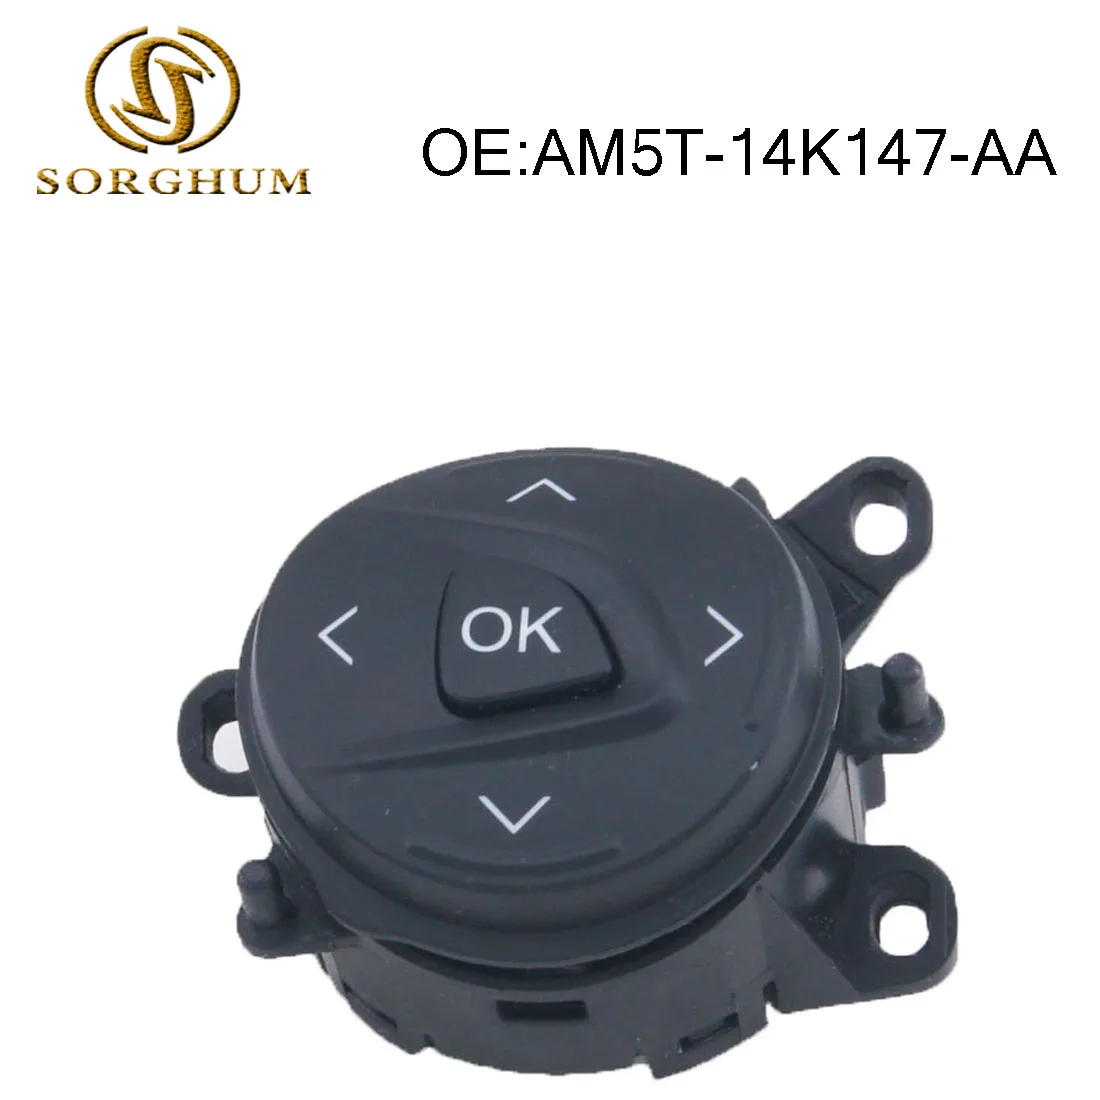 

Steering Wheel Button Switch Wheel Controls Switches AM5T-14K147-AA For Ford FOCUS III Box 2014 Escap